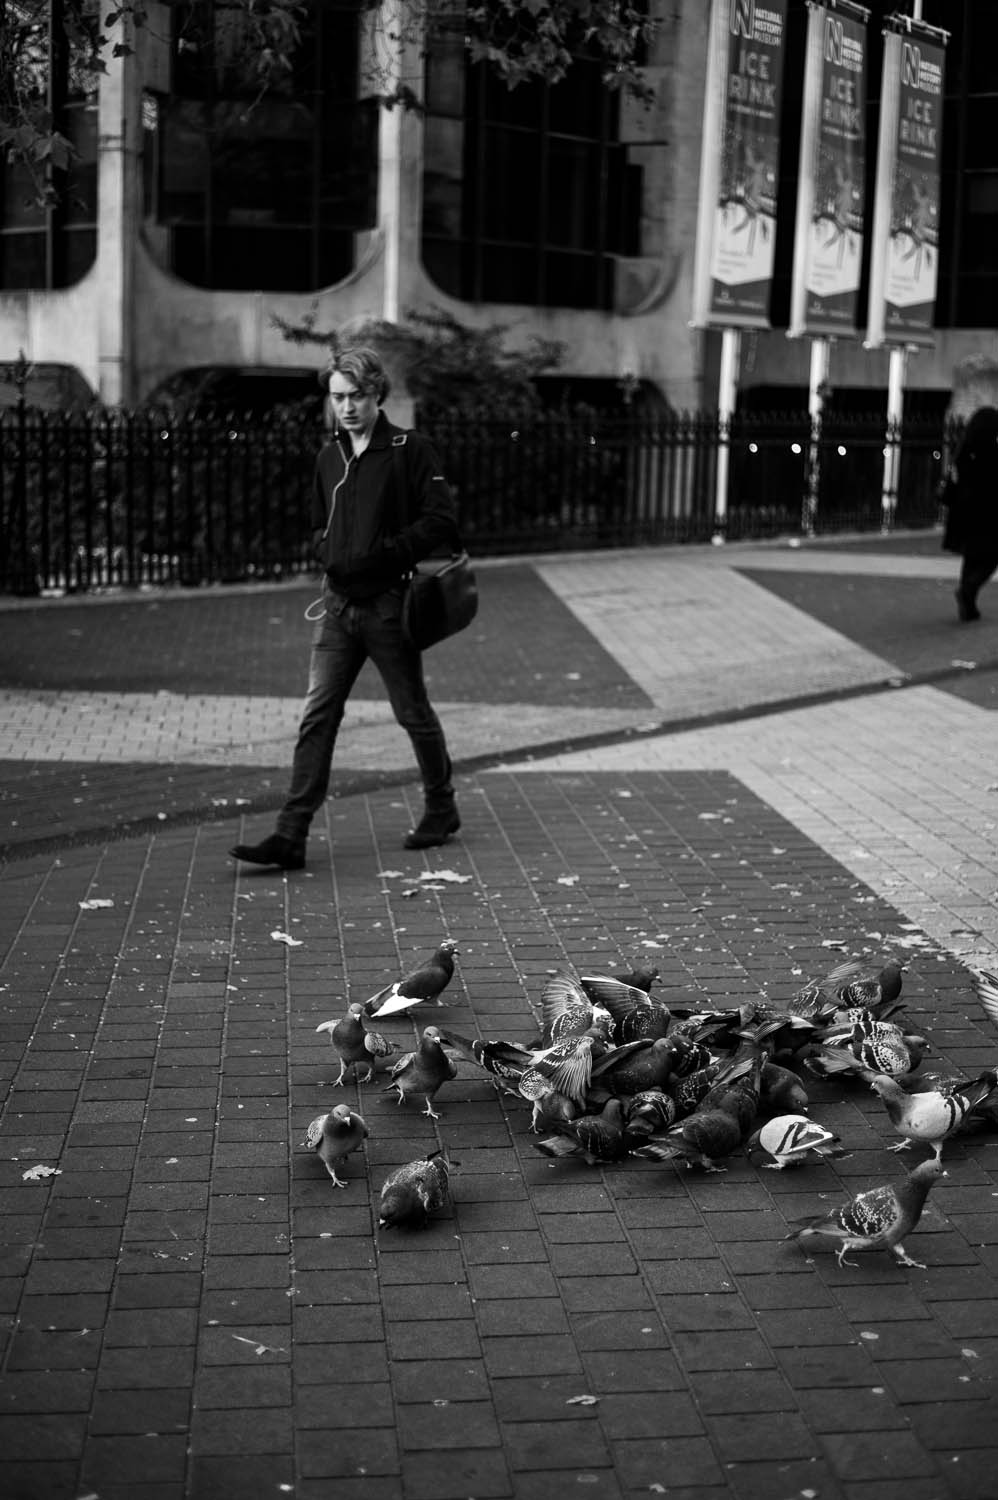 A man walks by a group of pigeons in London